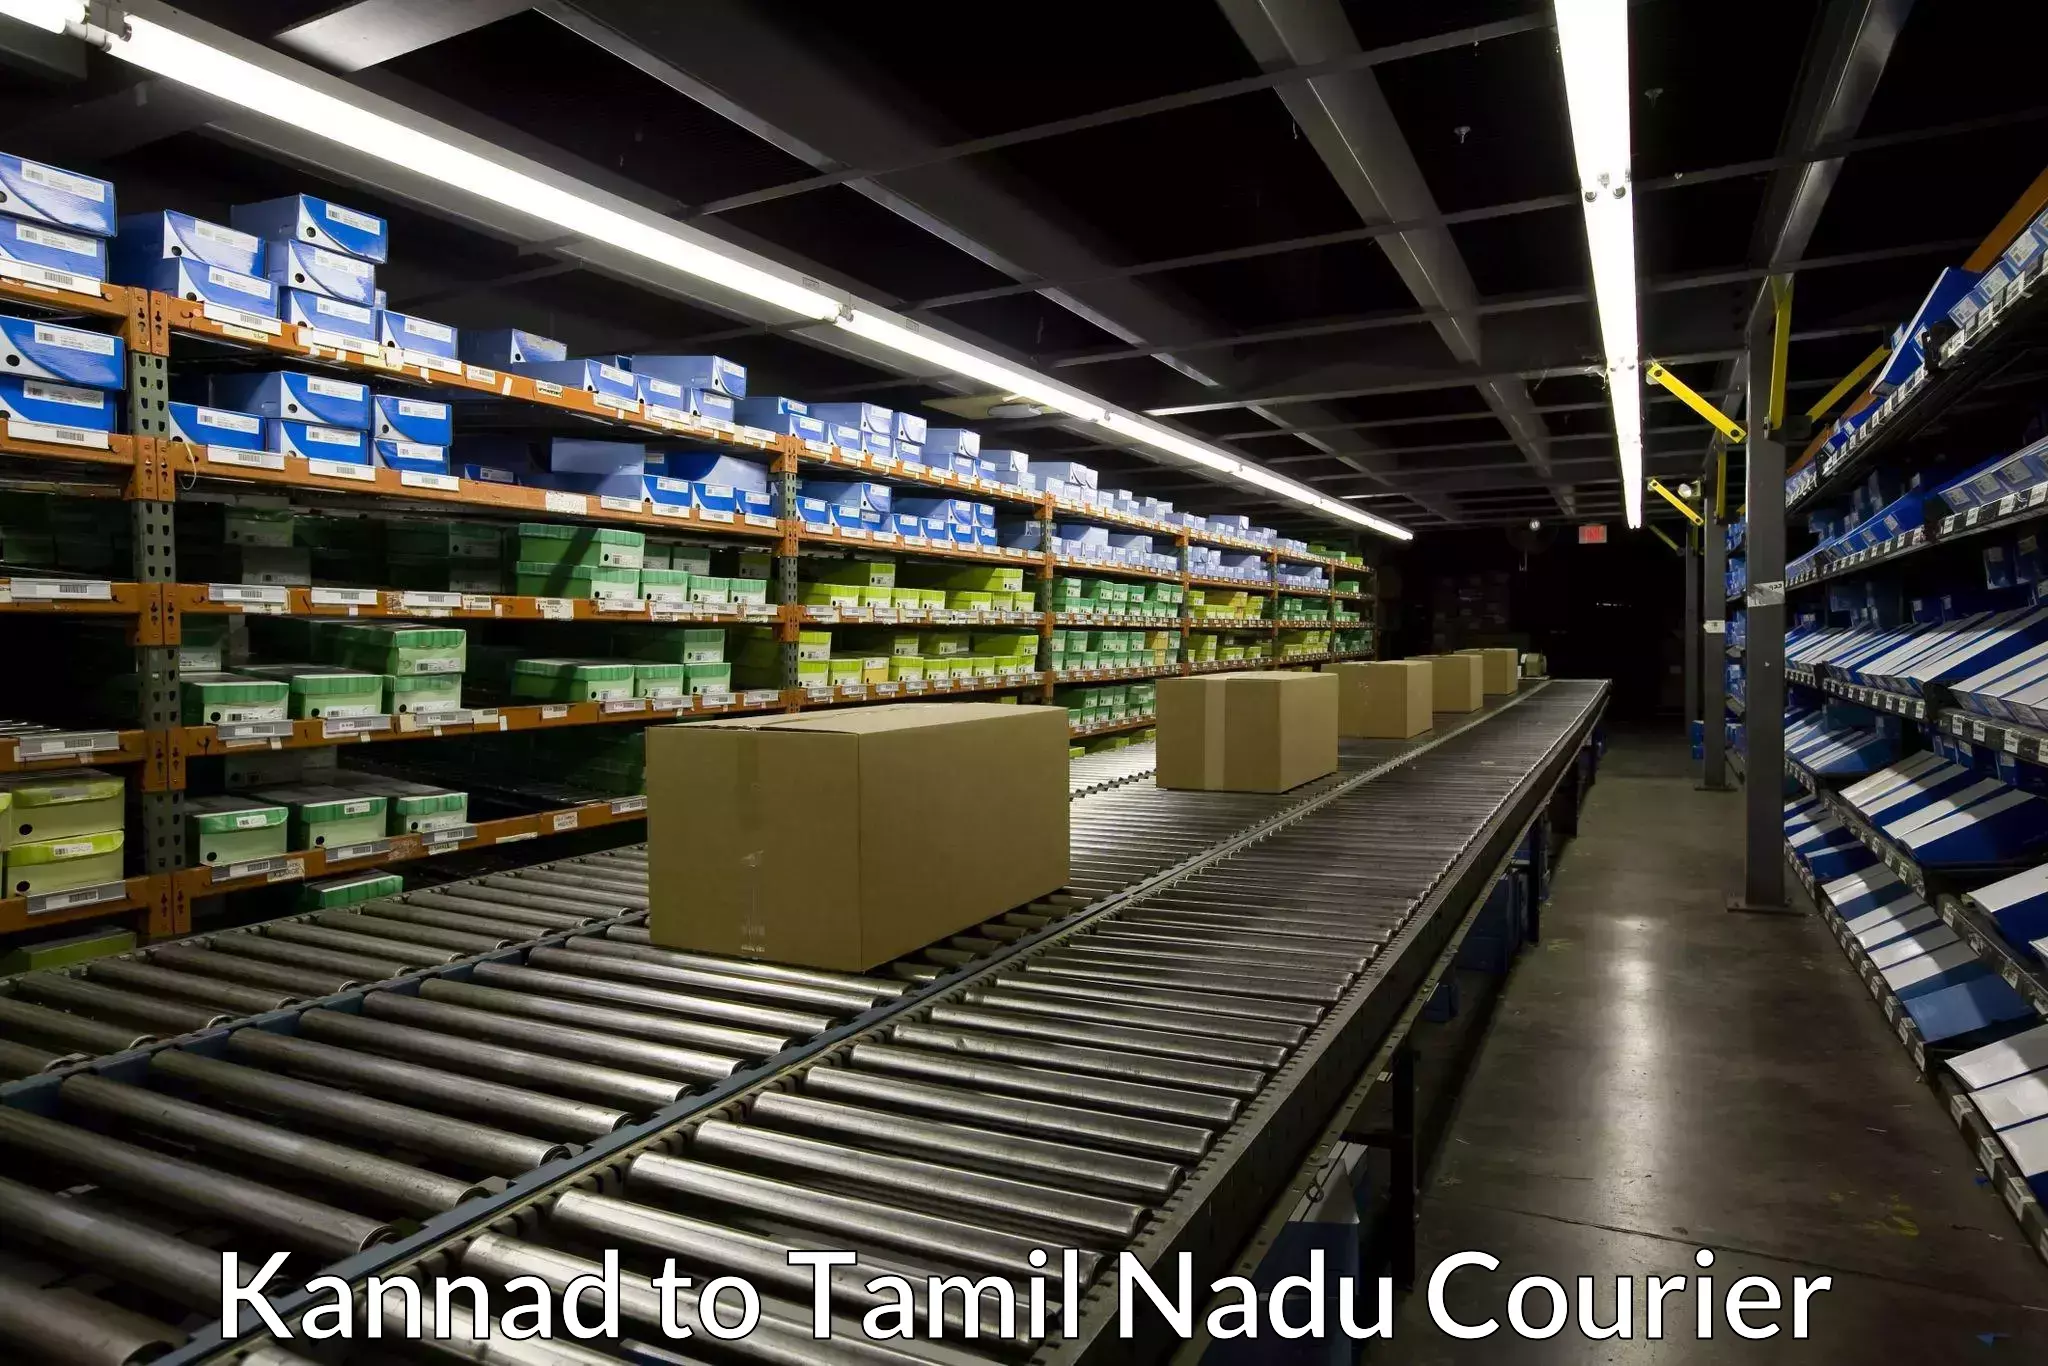 Reliable package handling Kannad to Perambalur